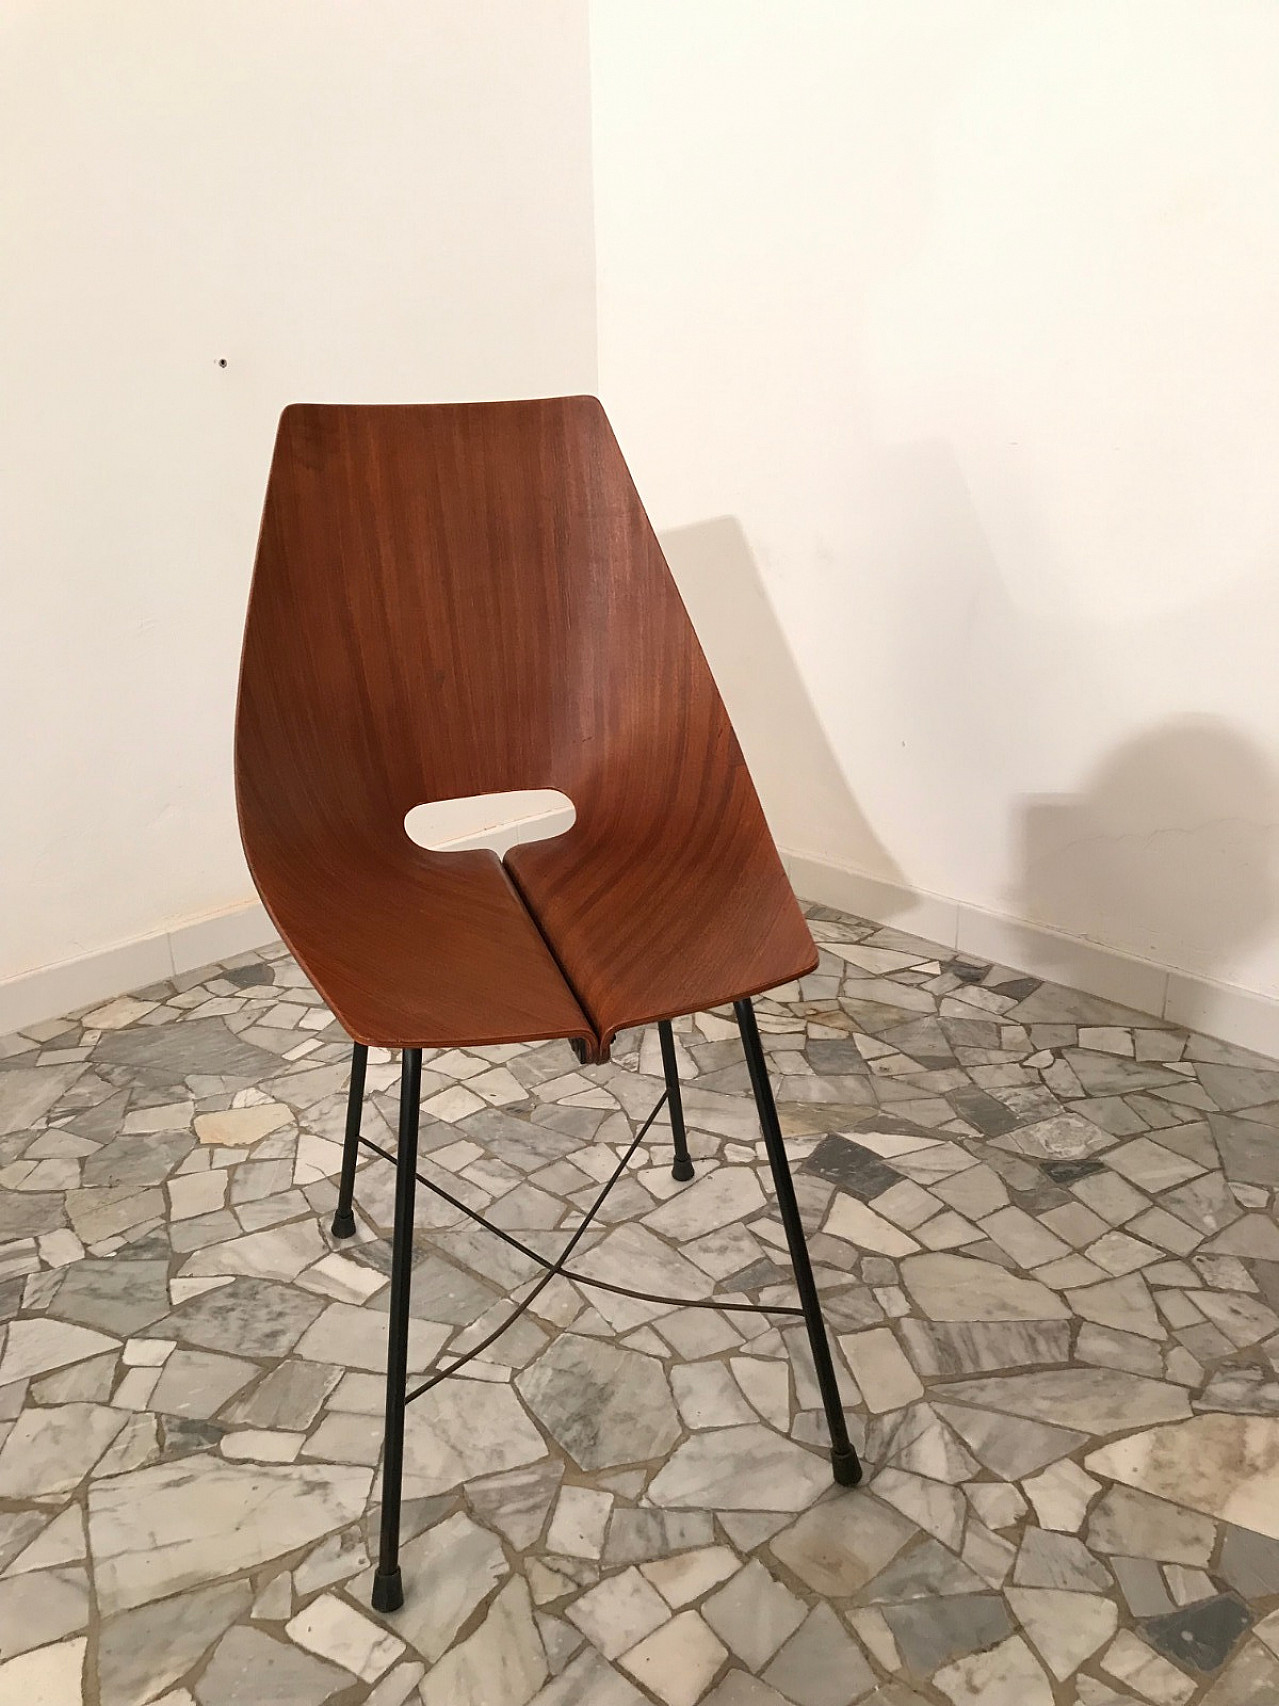 6 chairs plywood curved companies Monza 2